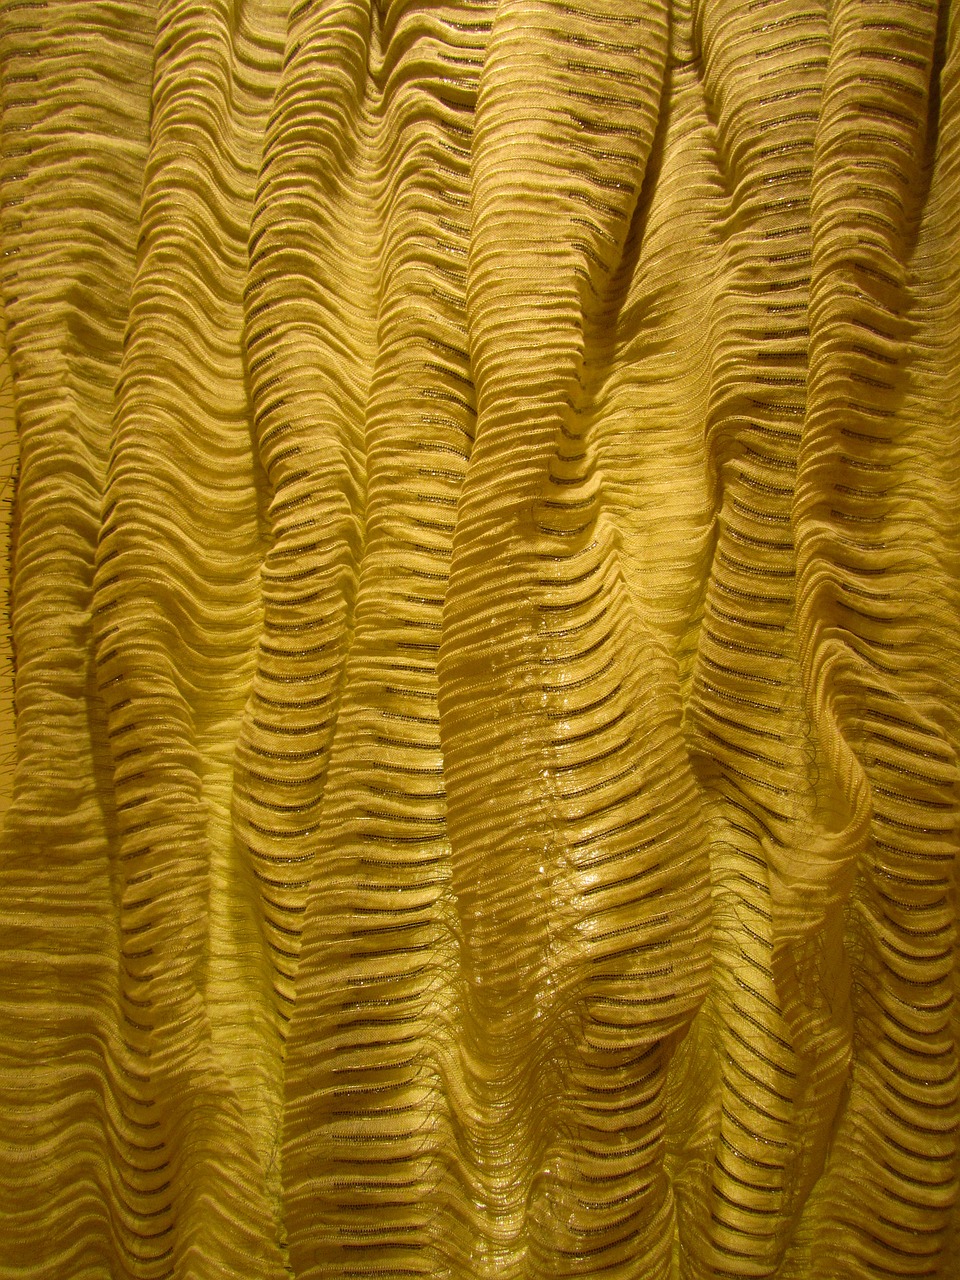 fabric gold texture free photo